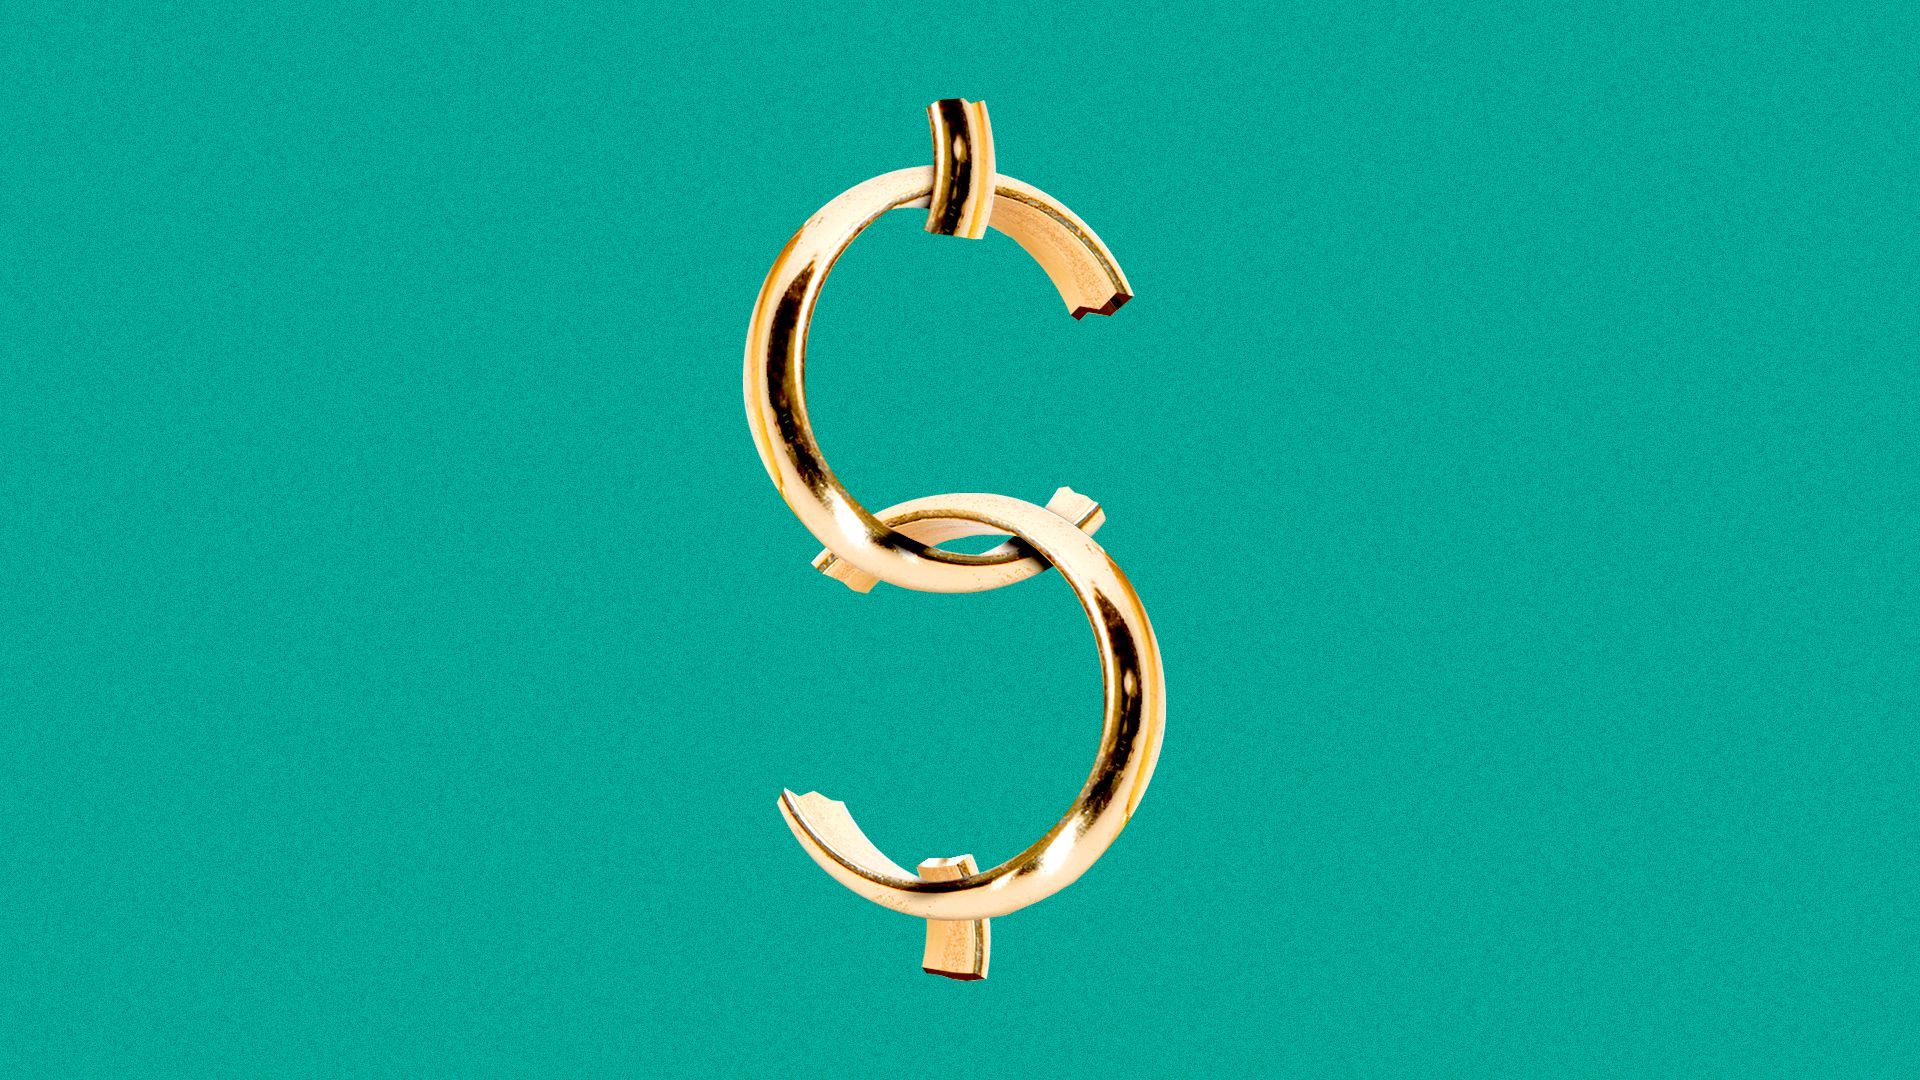 Illustration of two broken wedding bands arranged into the shape of a dollar sign.